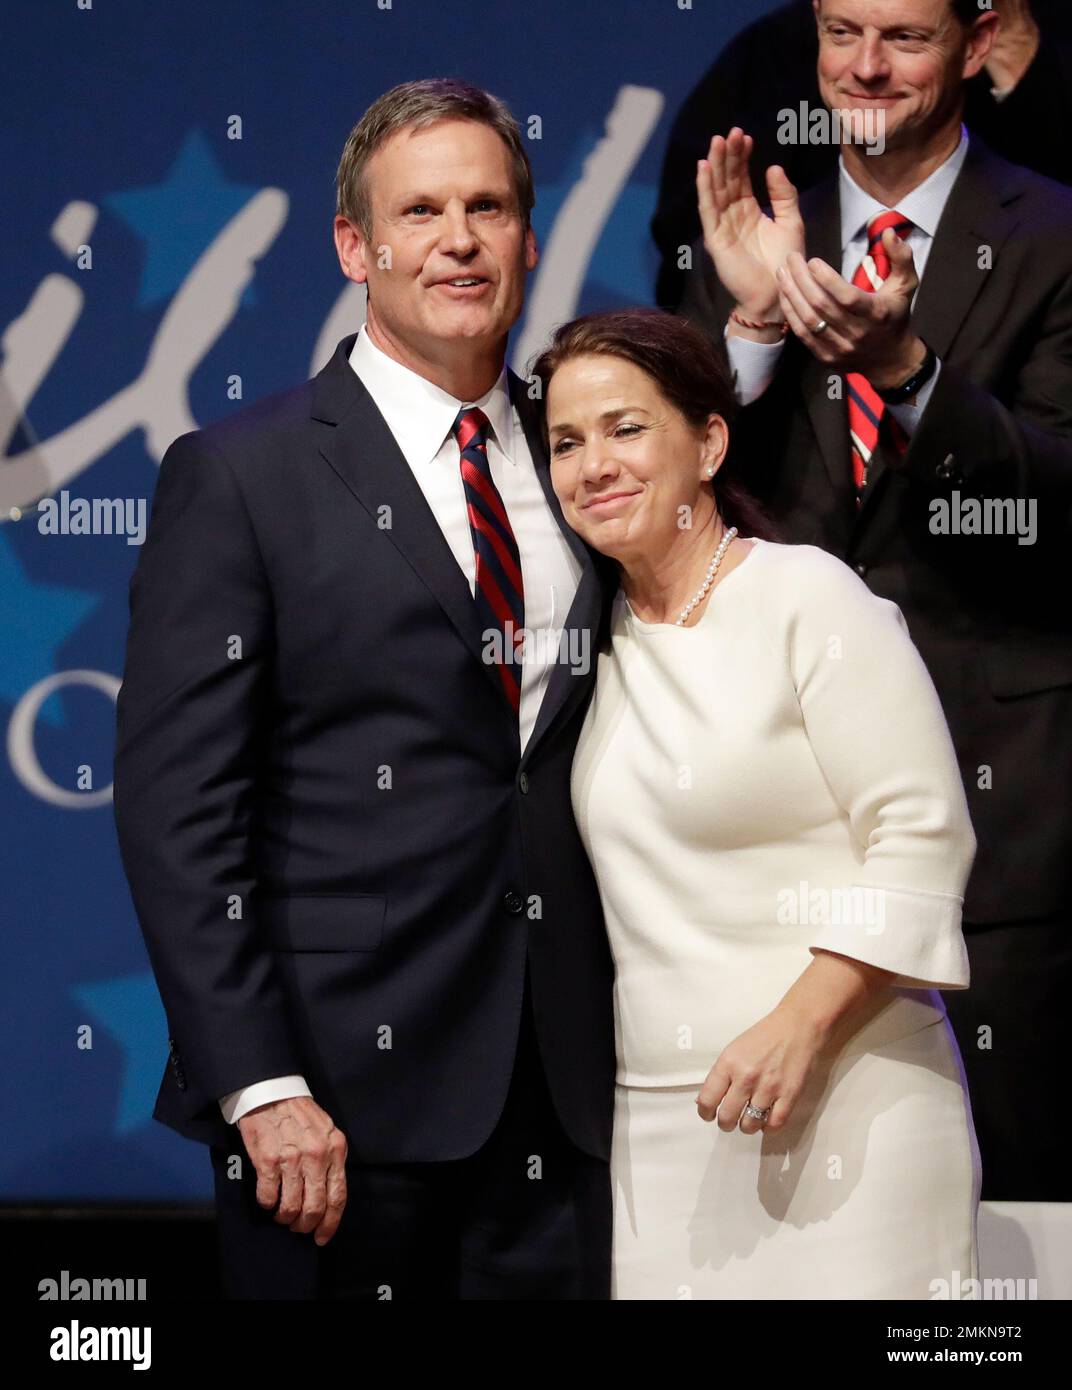 Maria Lee, wife of Tennessee Gov. Bill Lee, walks onto the stage to join  her husband after he was declared the winner in his bid for re-election  Tuesday, Nov. 8, 2022, in